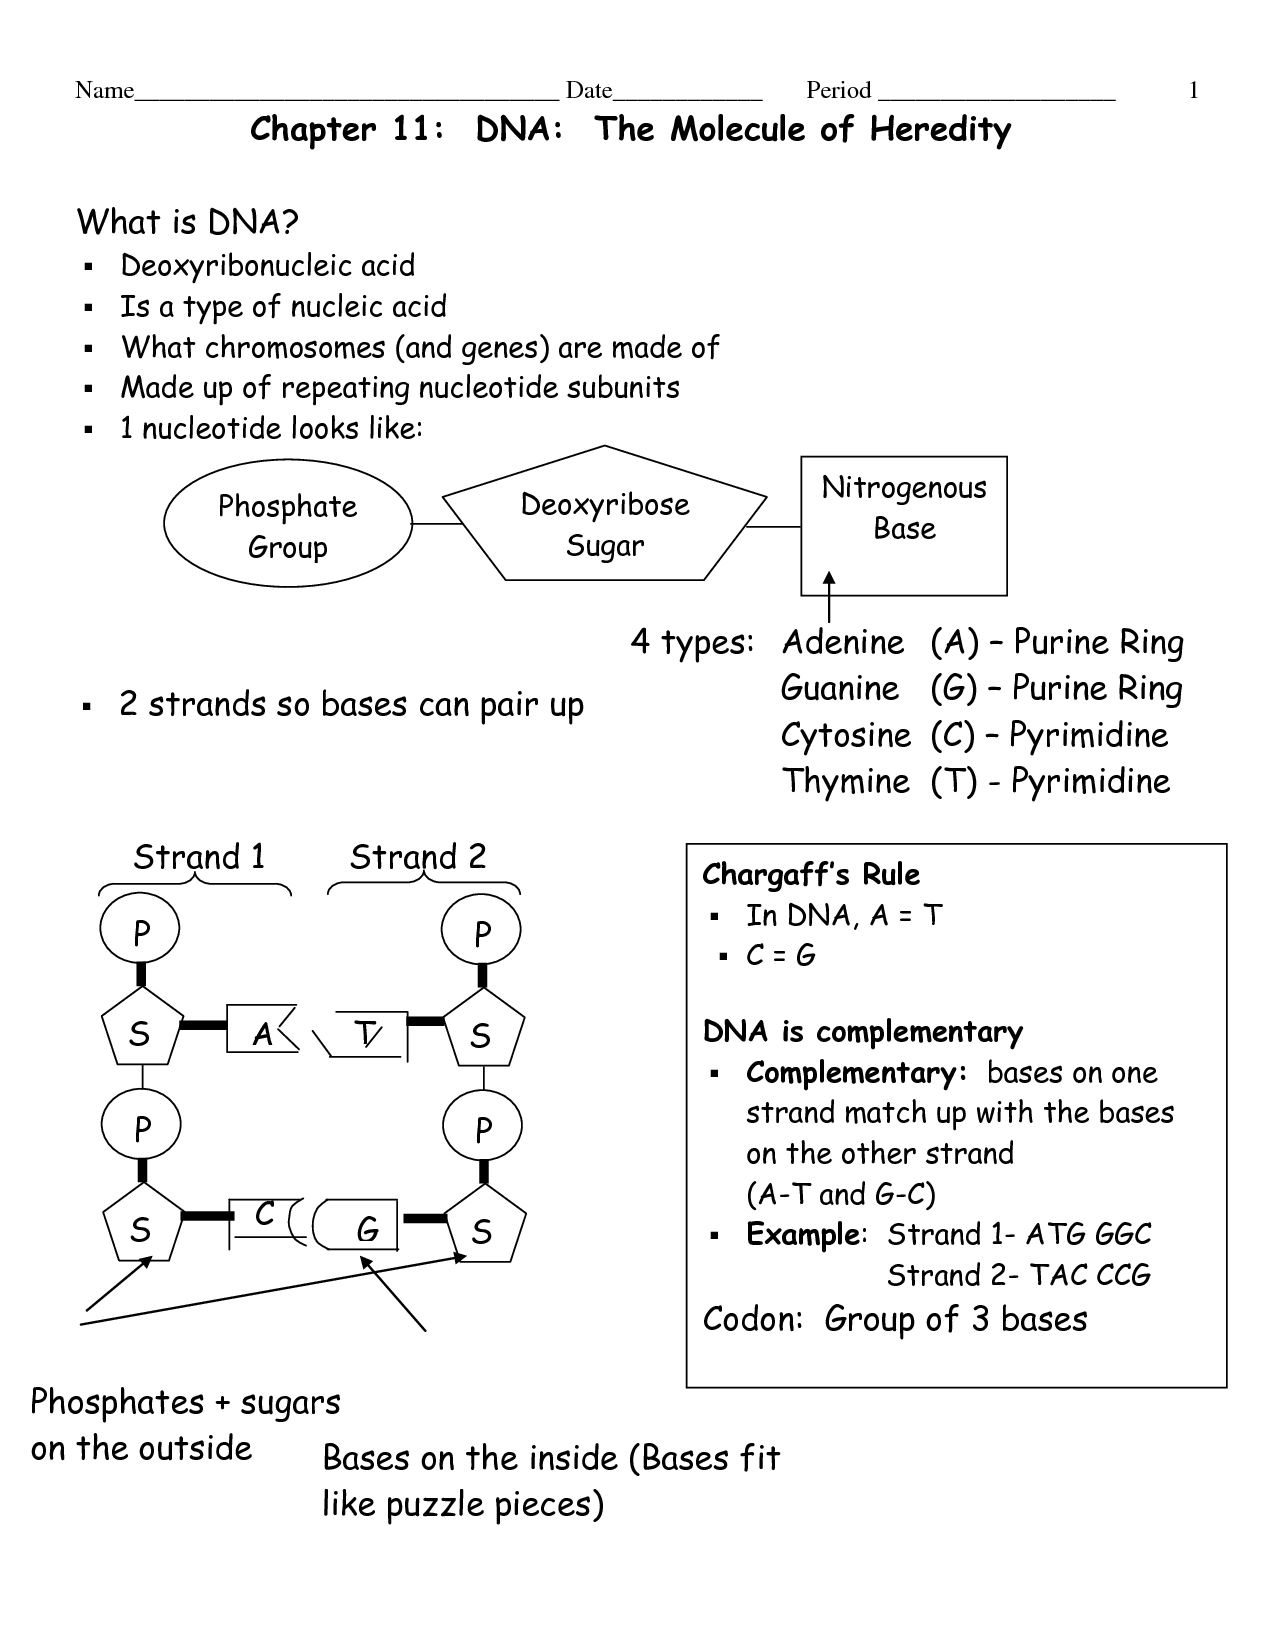 DNA the Molecule of Heredity Worksheet Answer Key Image